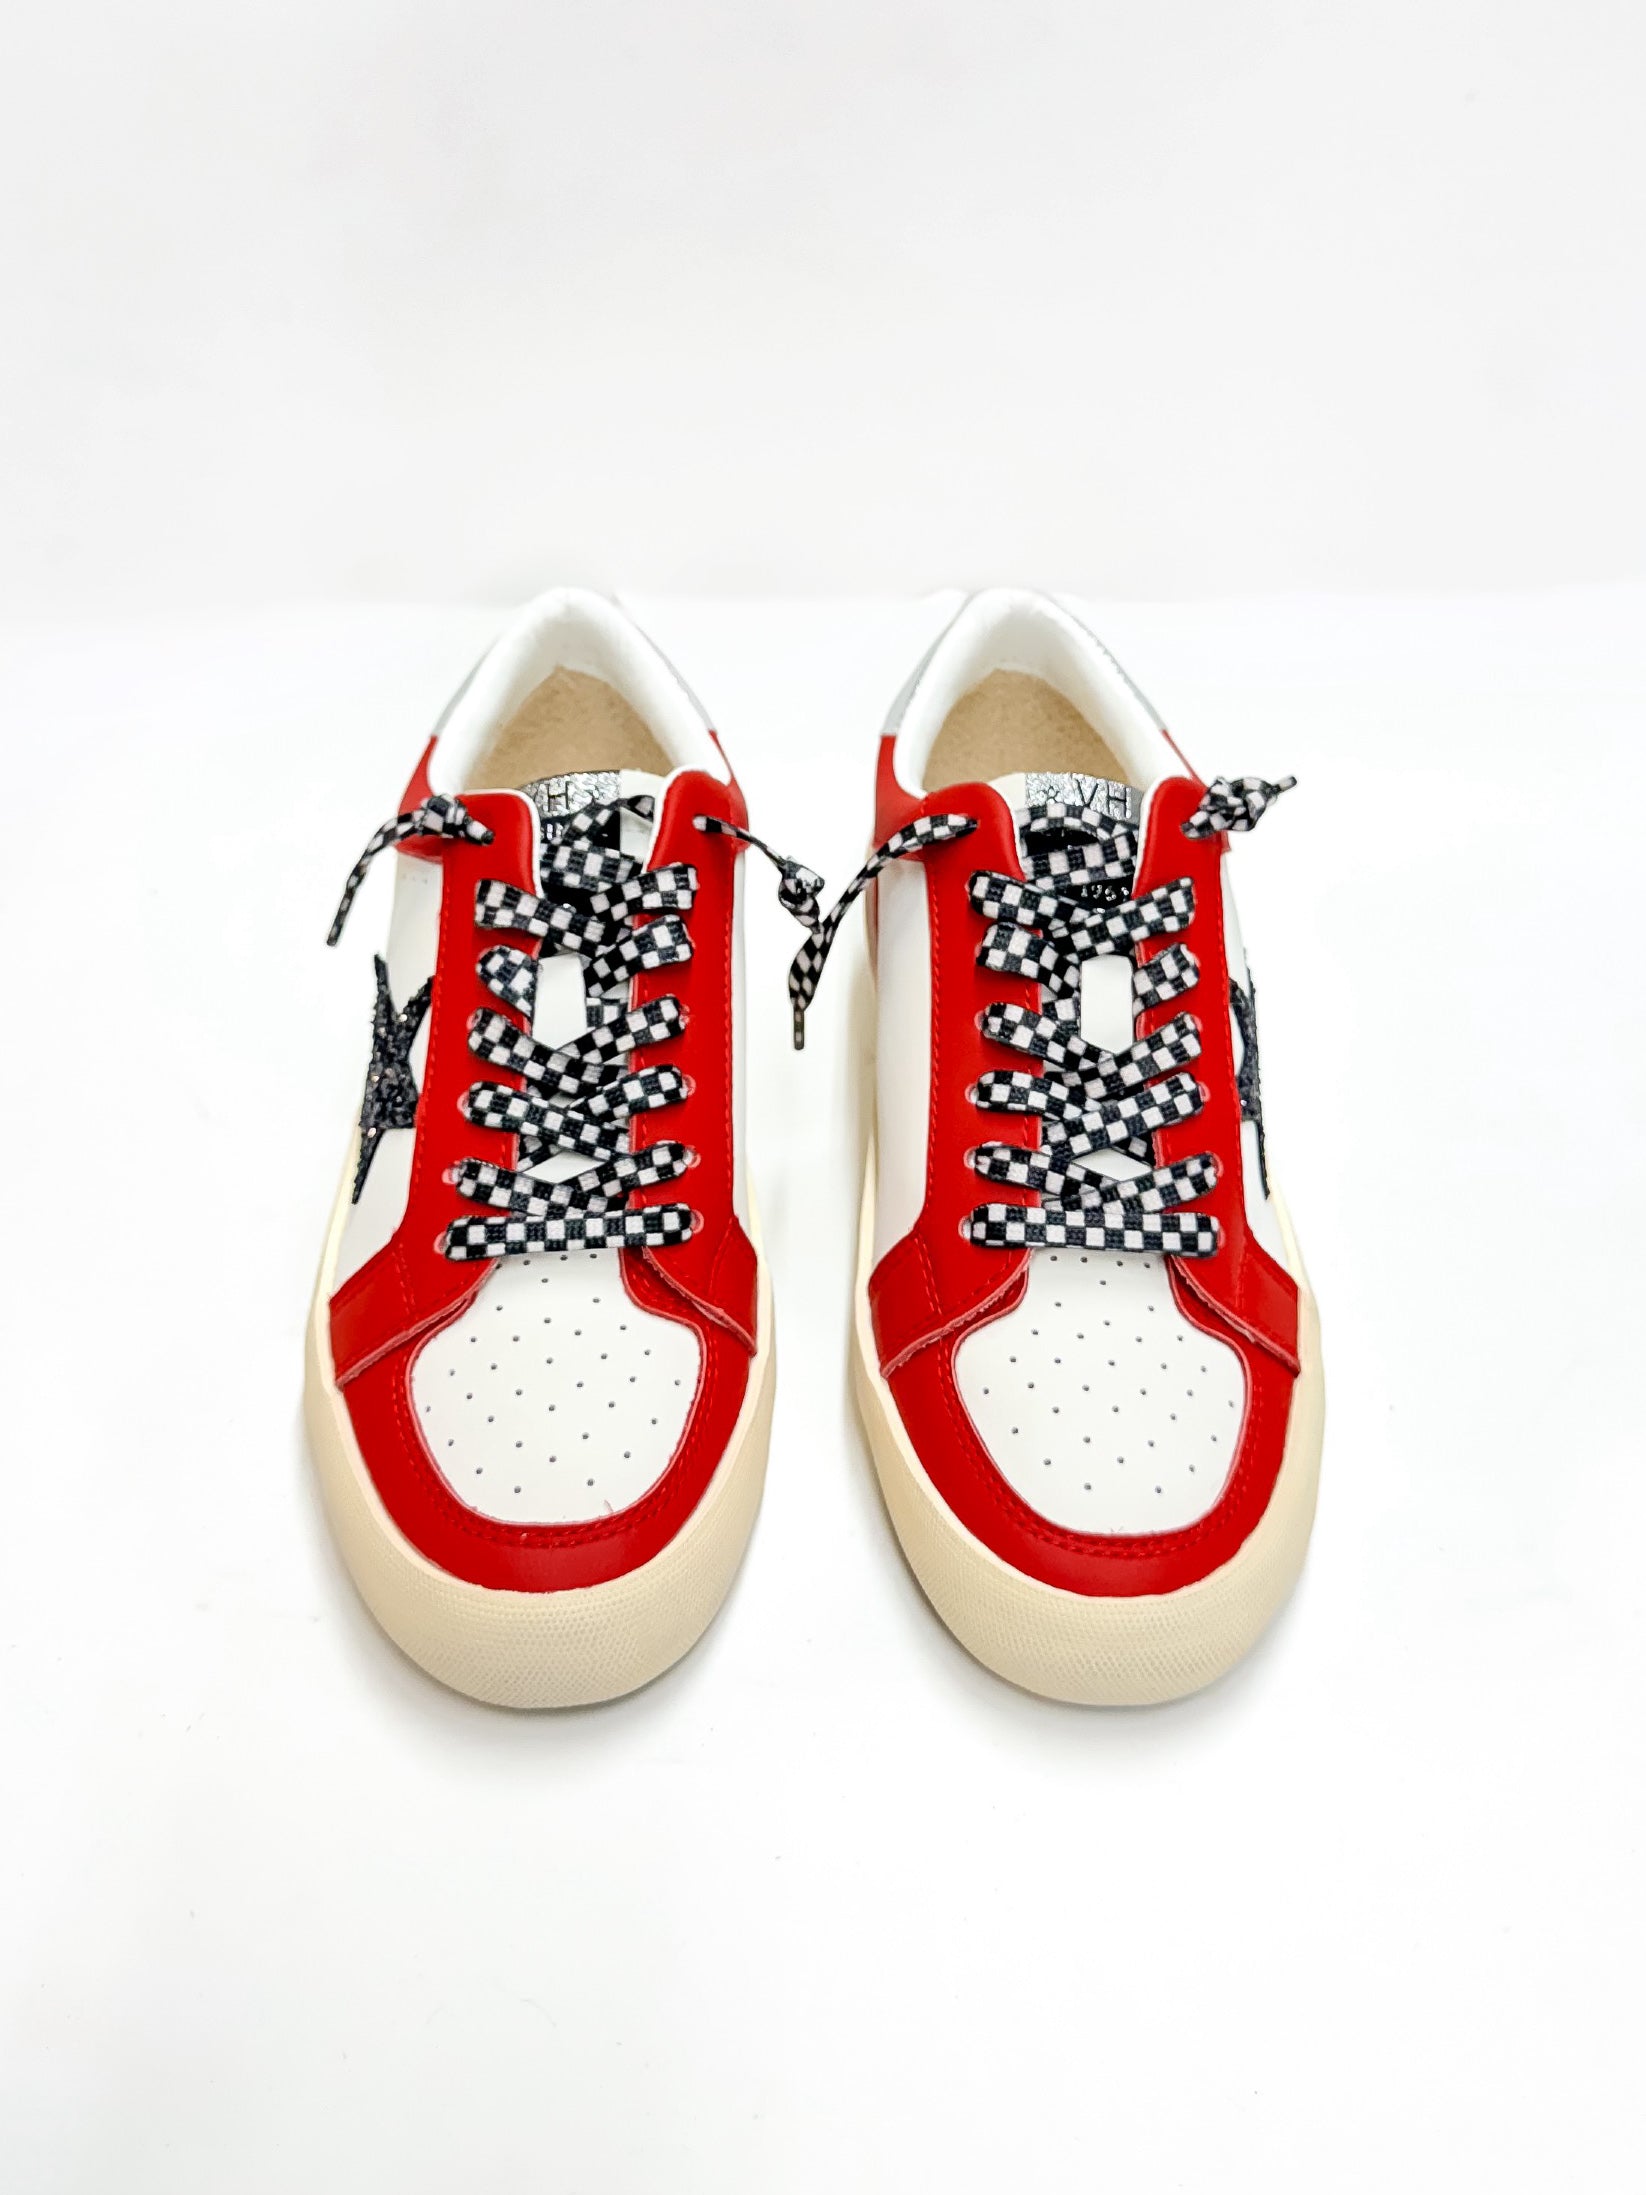 Vintage Havana | Reflex 12 Sneakers in Red Multi - Giddy Up Glamour Boutique